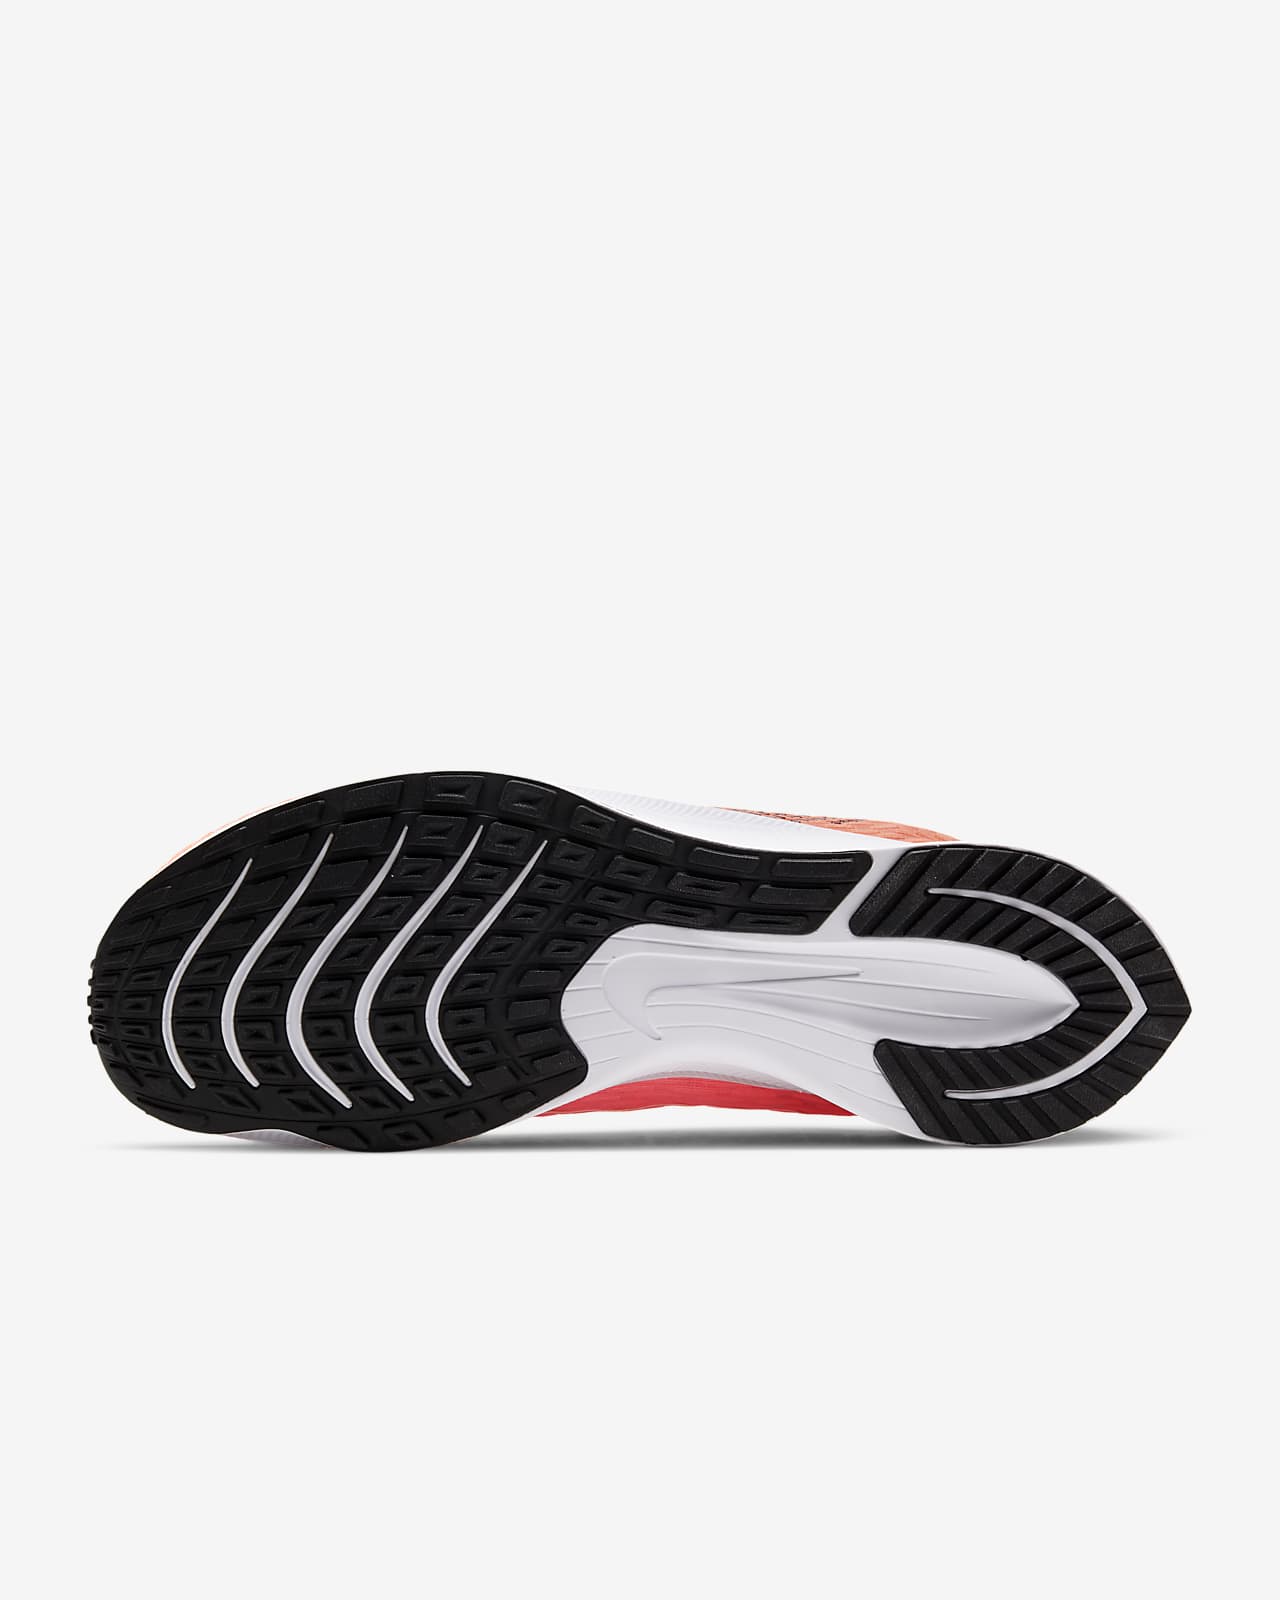 Nike Zoom Rival Fly 2 Men's Racing Shoes. ID